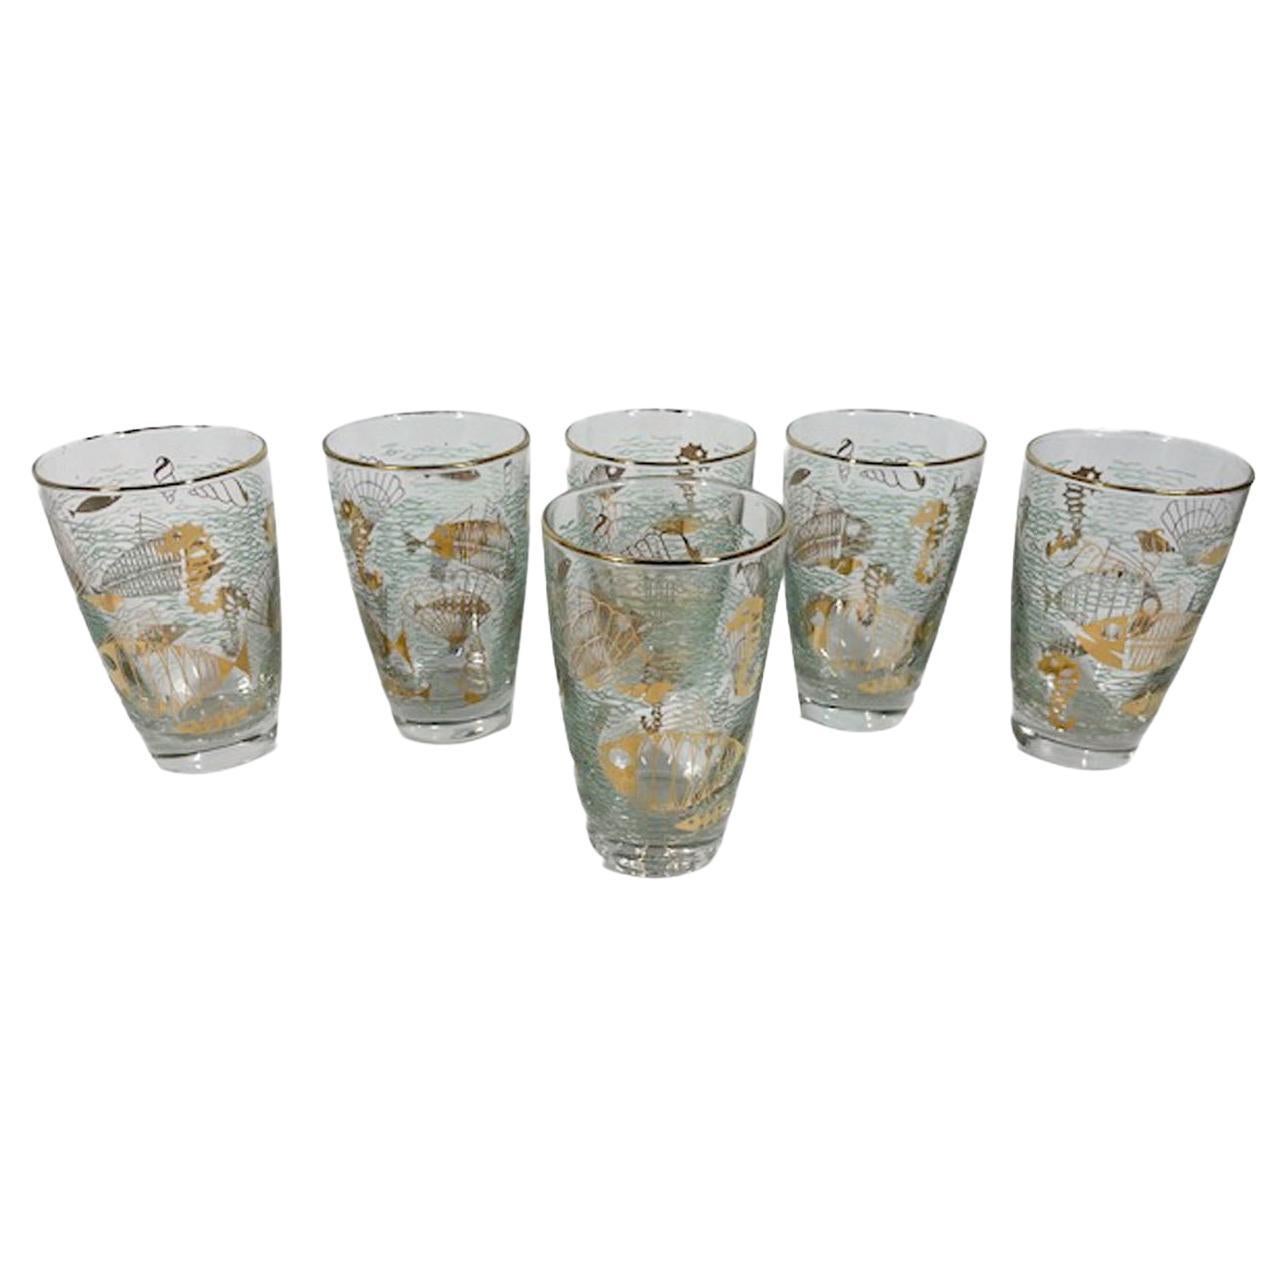 Set of 6 Libbey Glass Tumblers in the Marine Life Pattern, Discontinued in 1959